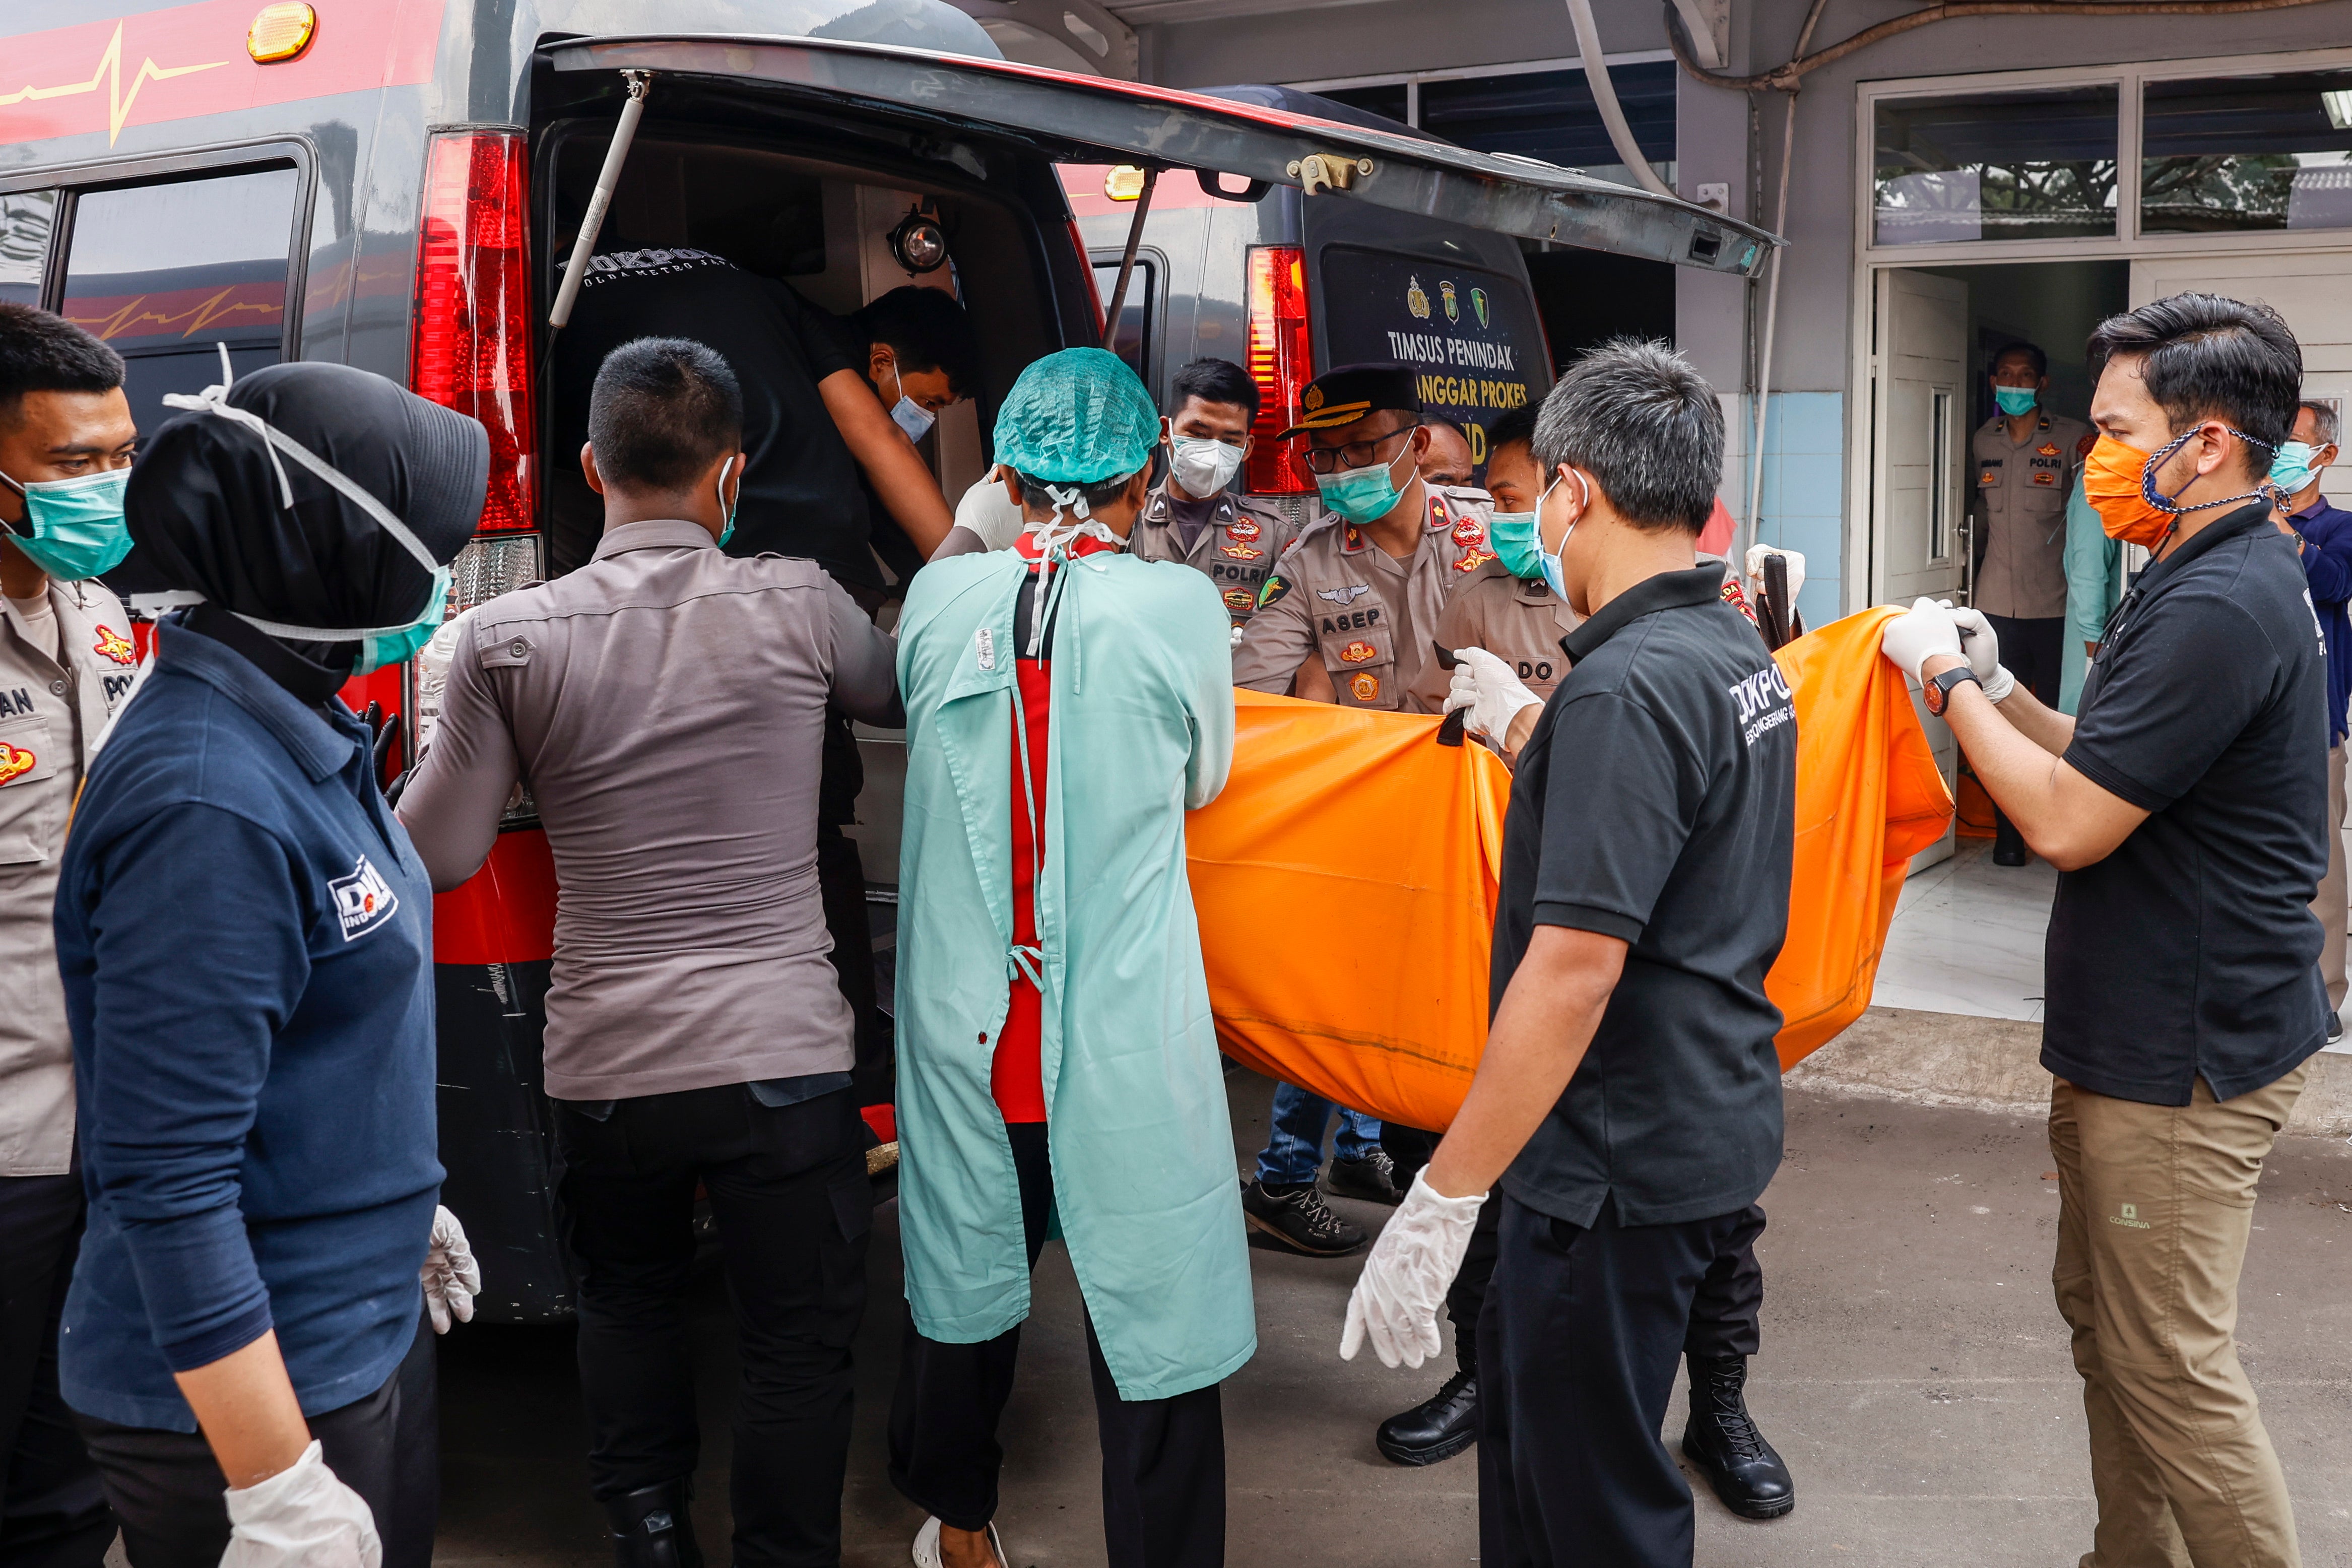 Disaster Victims Identification (DVI) police officers load a body bag onto a van in the aftermath of a prison fire at a hospital in Tangerang, Banten, Indonesia, 8 September 2021